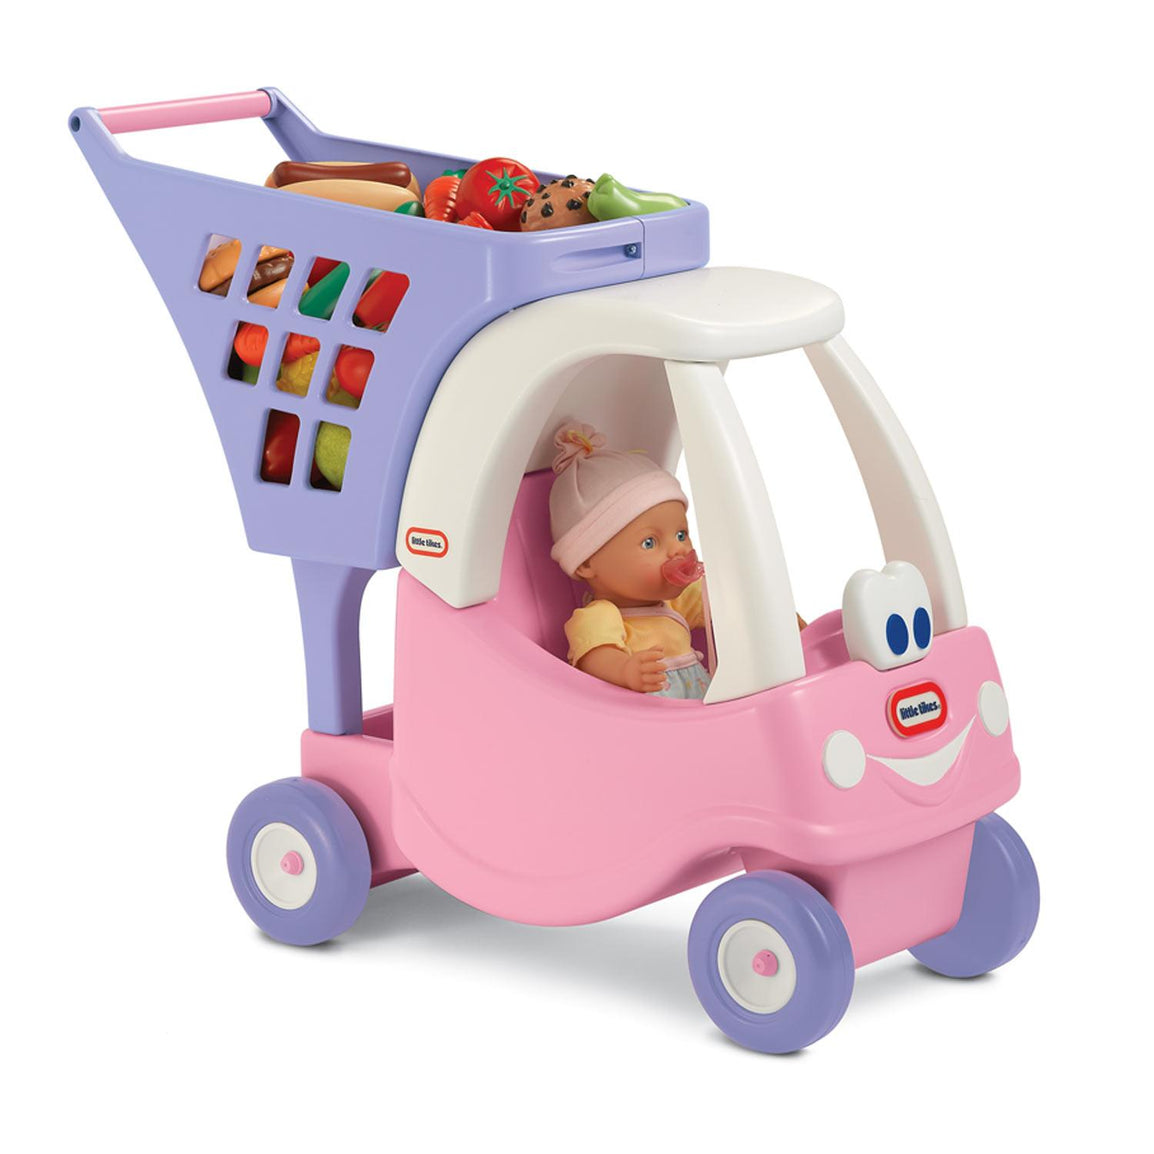 Kids can put their favorite toy inside the Cozy Coupe so they can ride in style